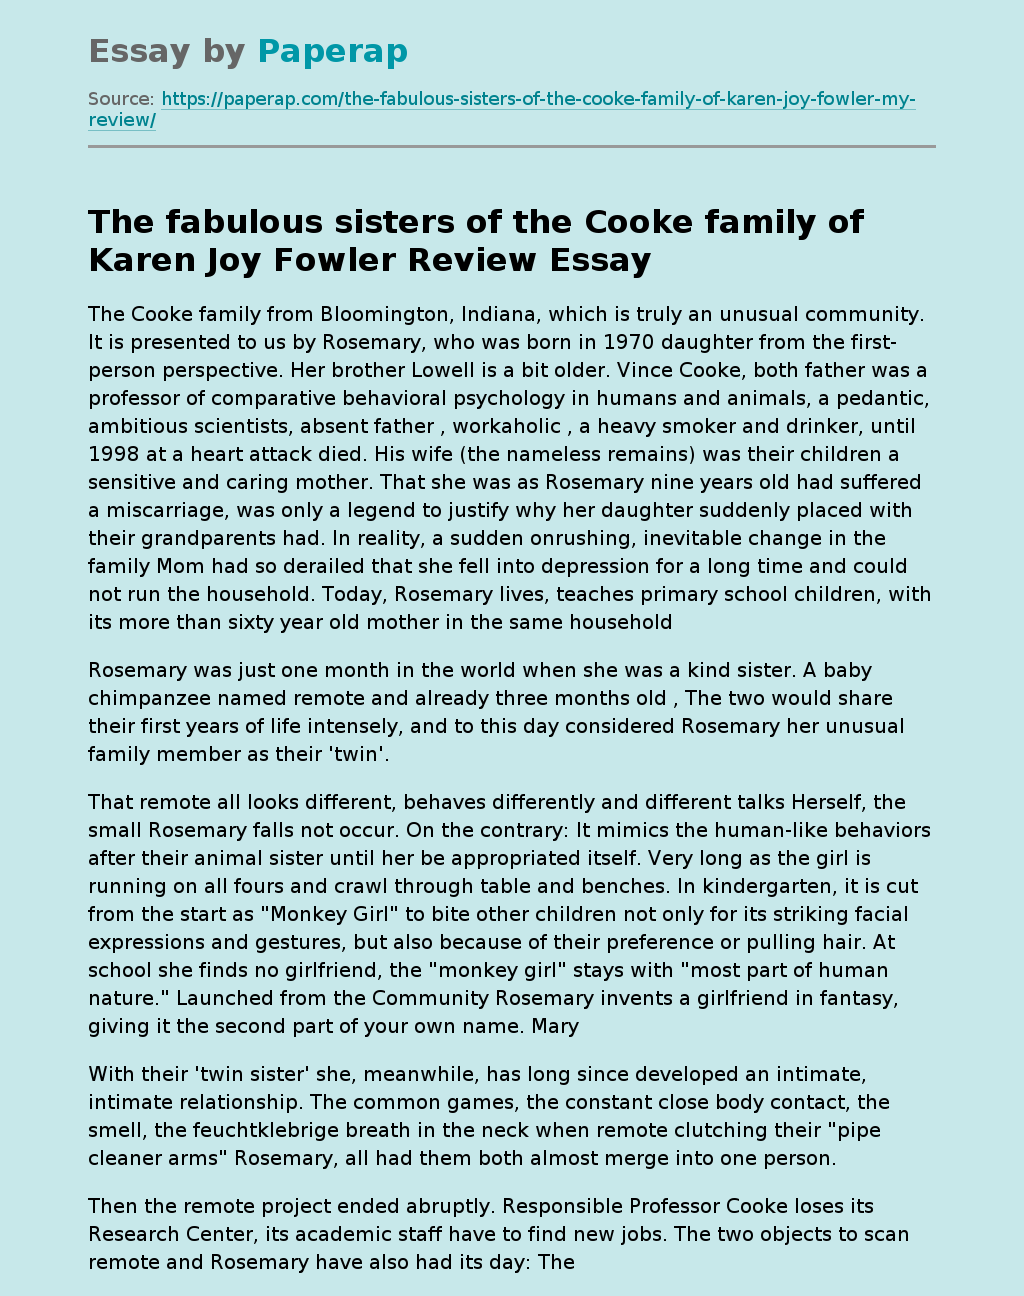 The fabulous sisters of the Cooke family of Karen Joy Fowler Review